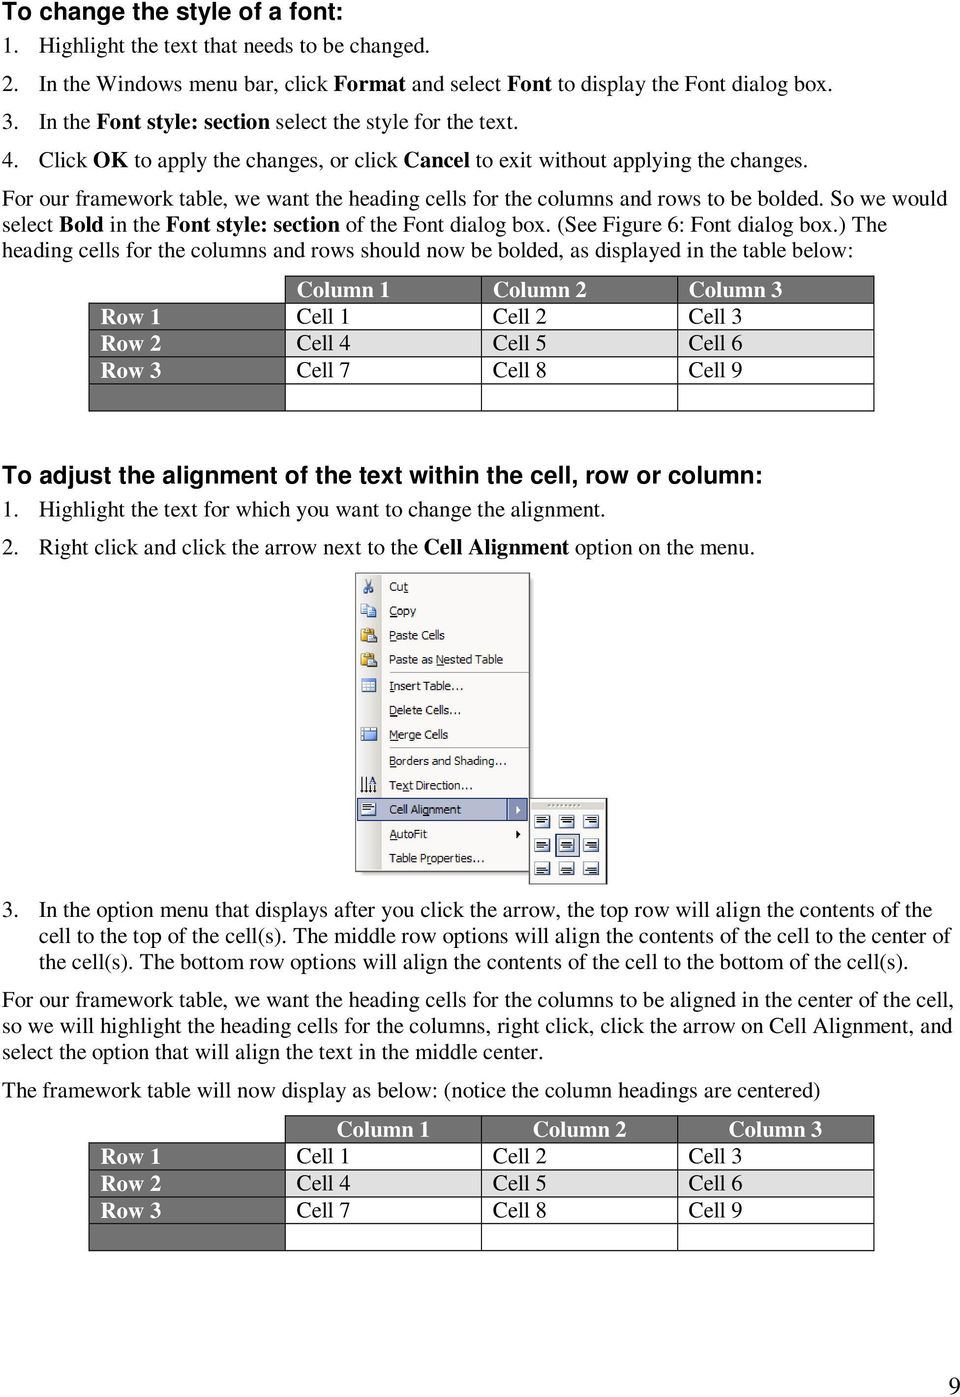 For our framework table, we want the heading cells for the columns and rows to be bolded. So we would select Bold in the Font style: section of the Font dialog box. (See Figure 6: Font dialog box.